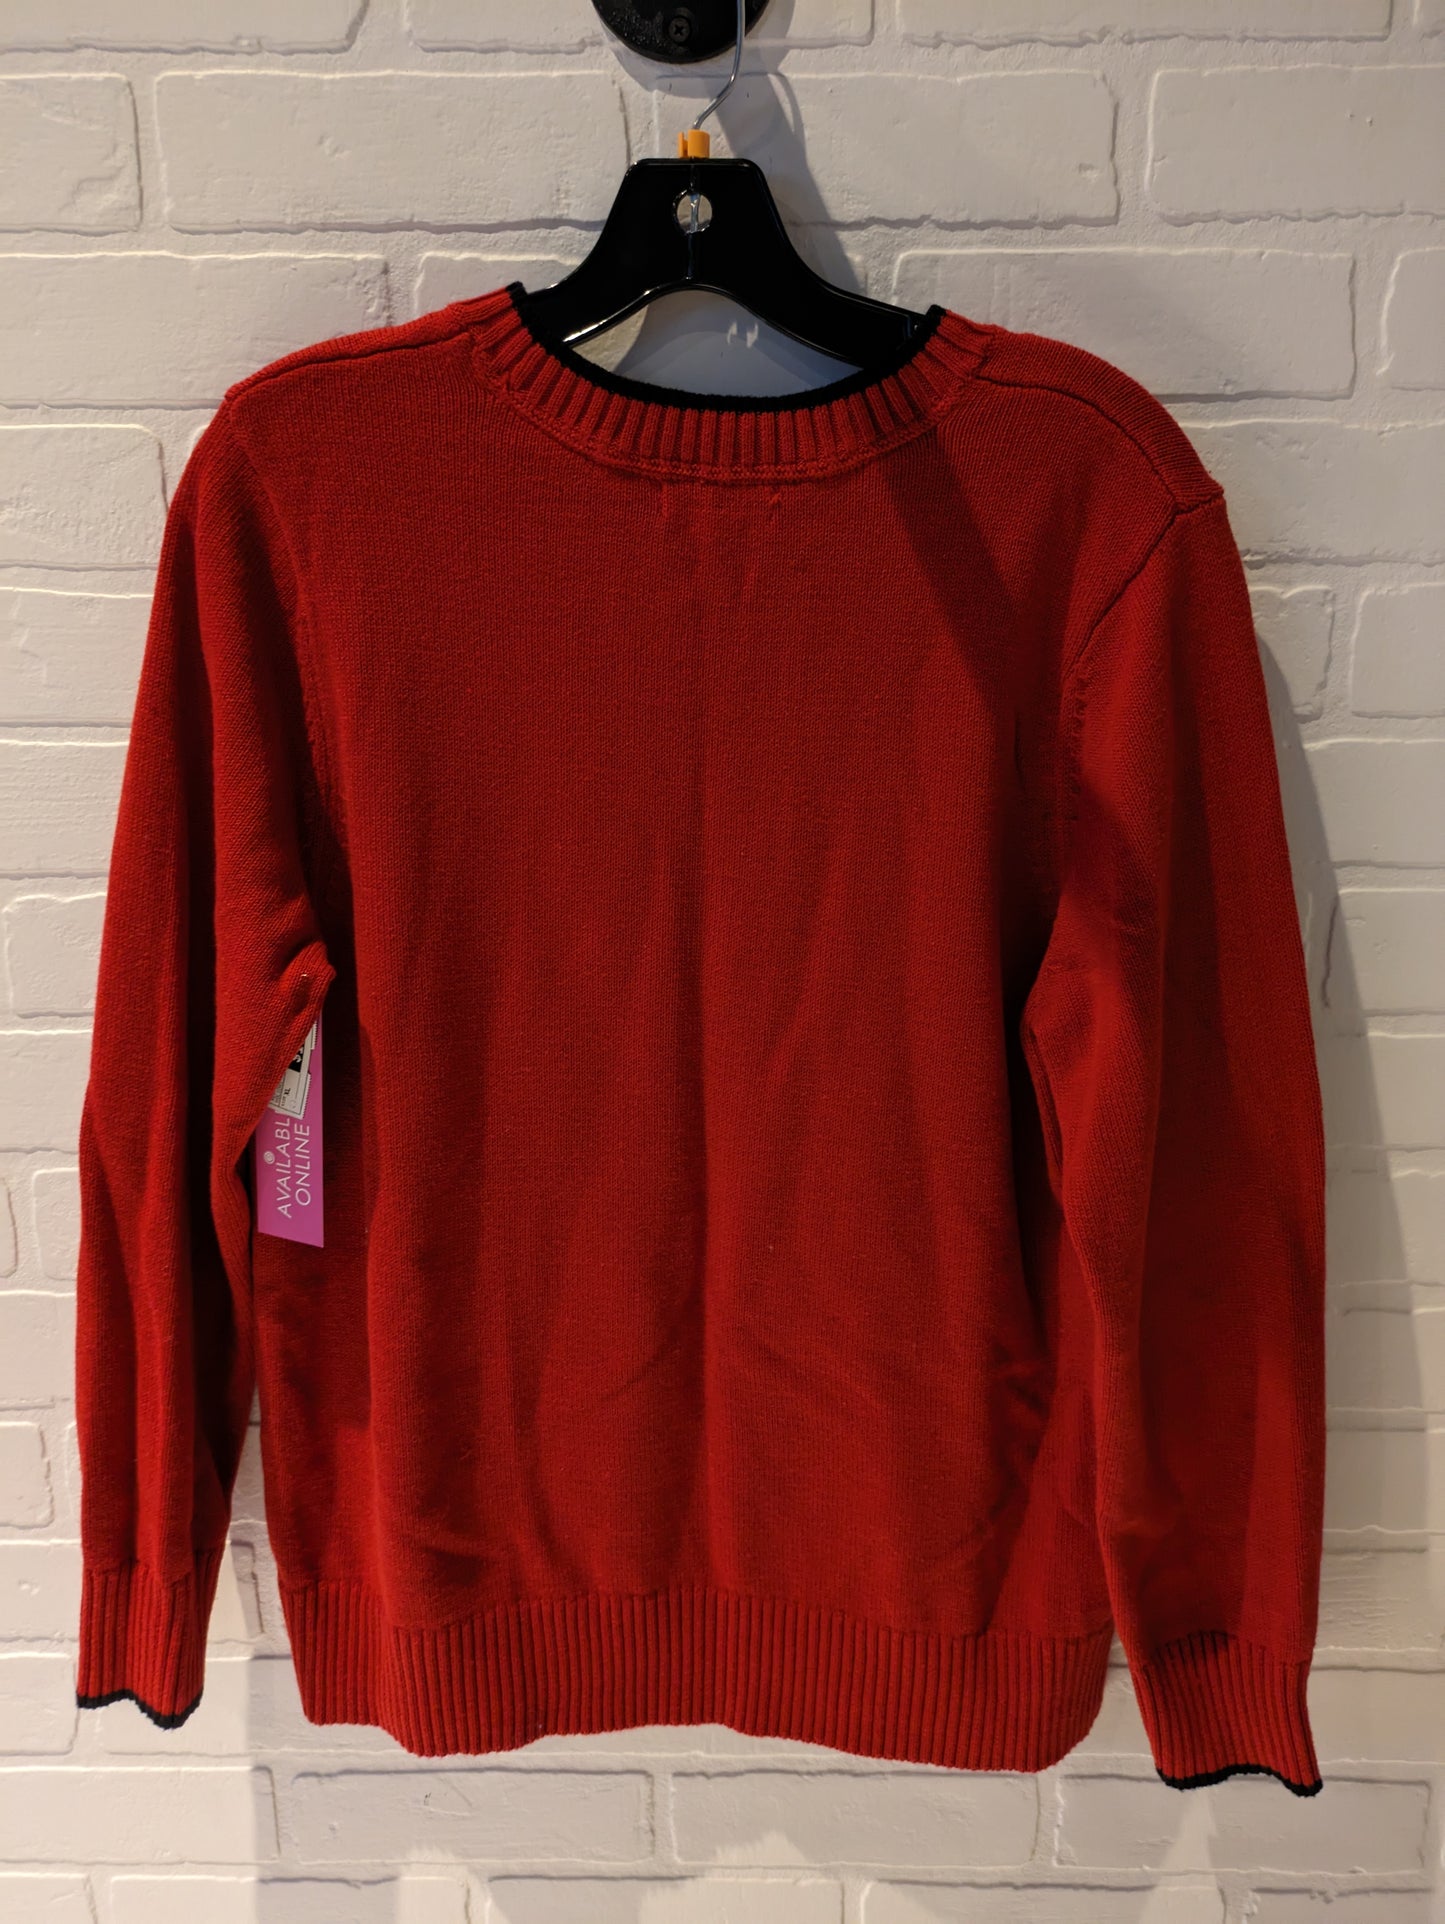 Sweater By Charter Club  Size: Xl